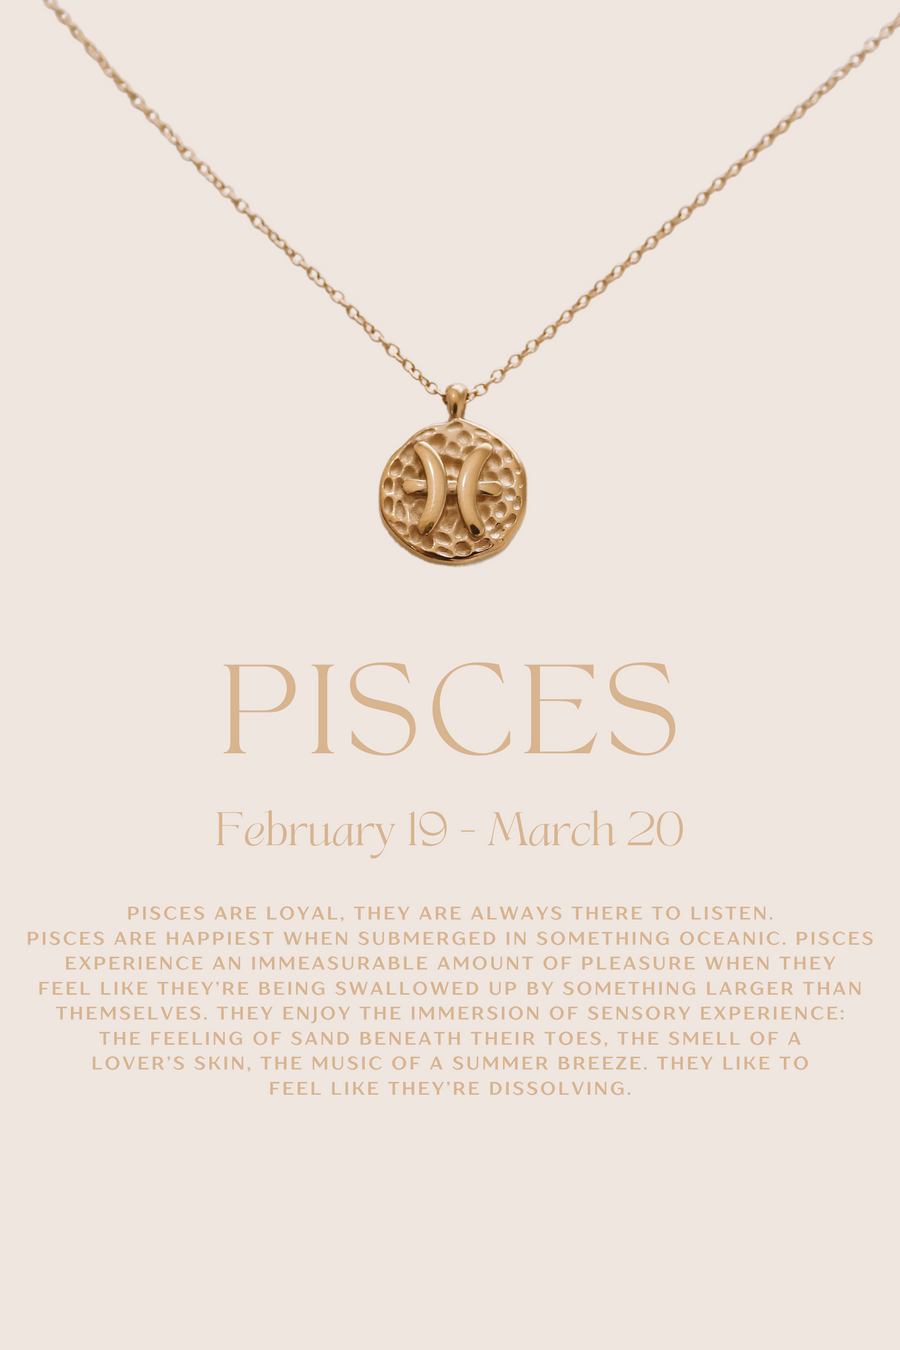 Noa - 14ct Gold or Silver Plated Zodiac Necklace